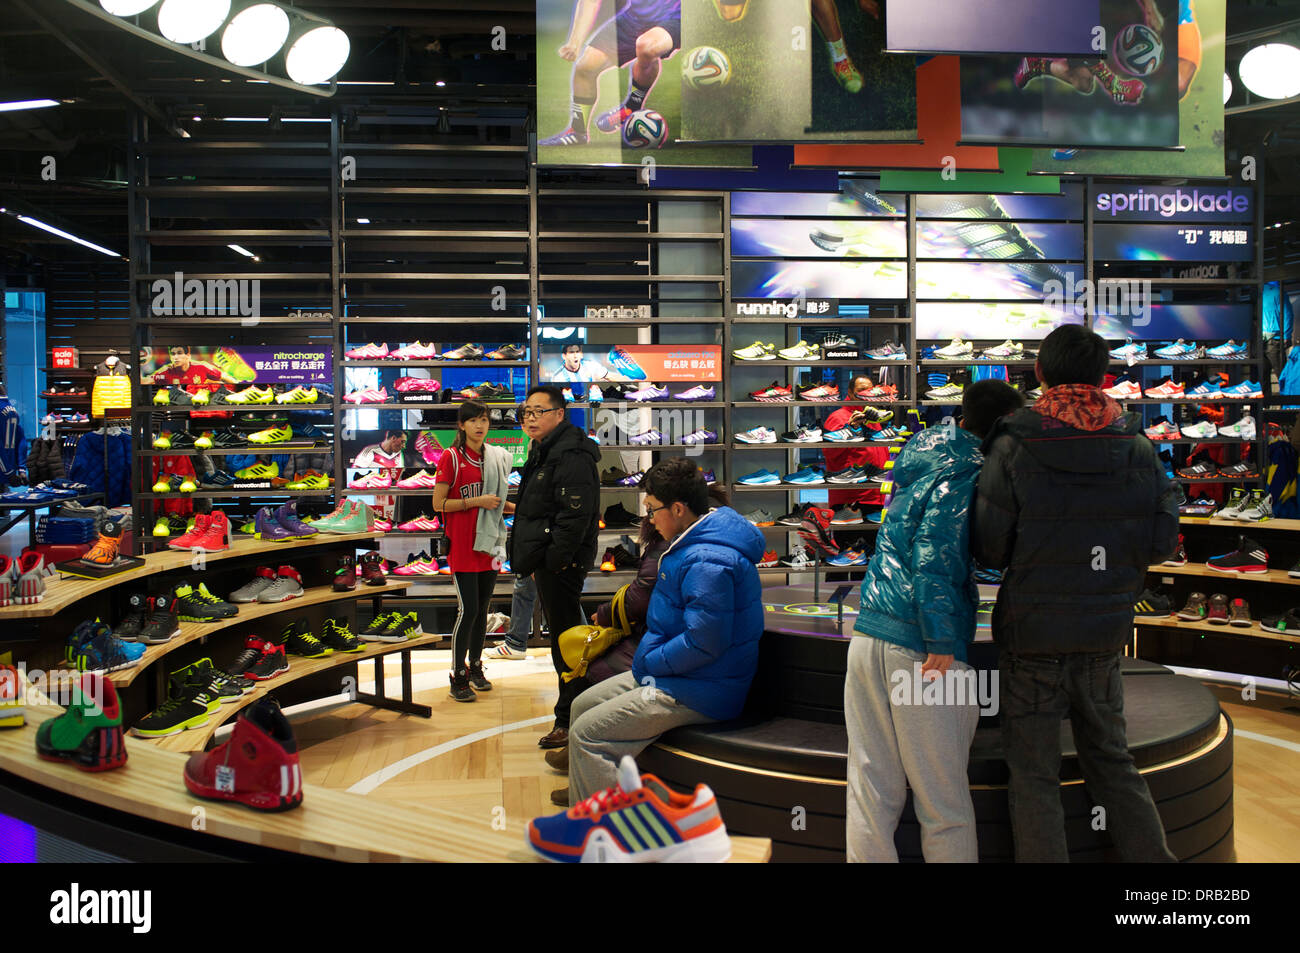 People shop at outlet in China. 21-Jan-2014 Photo -